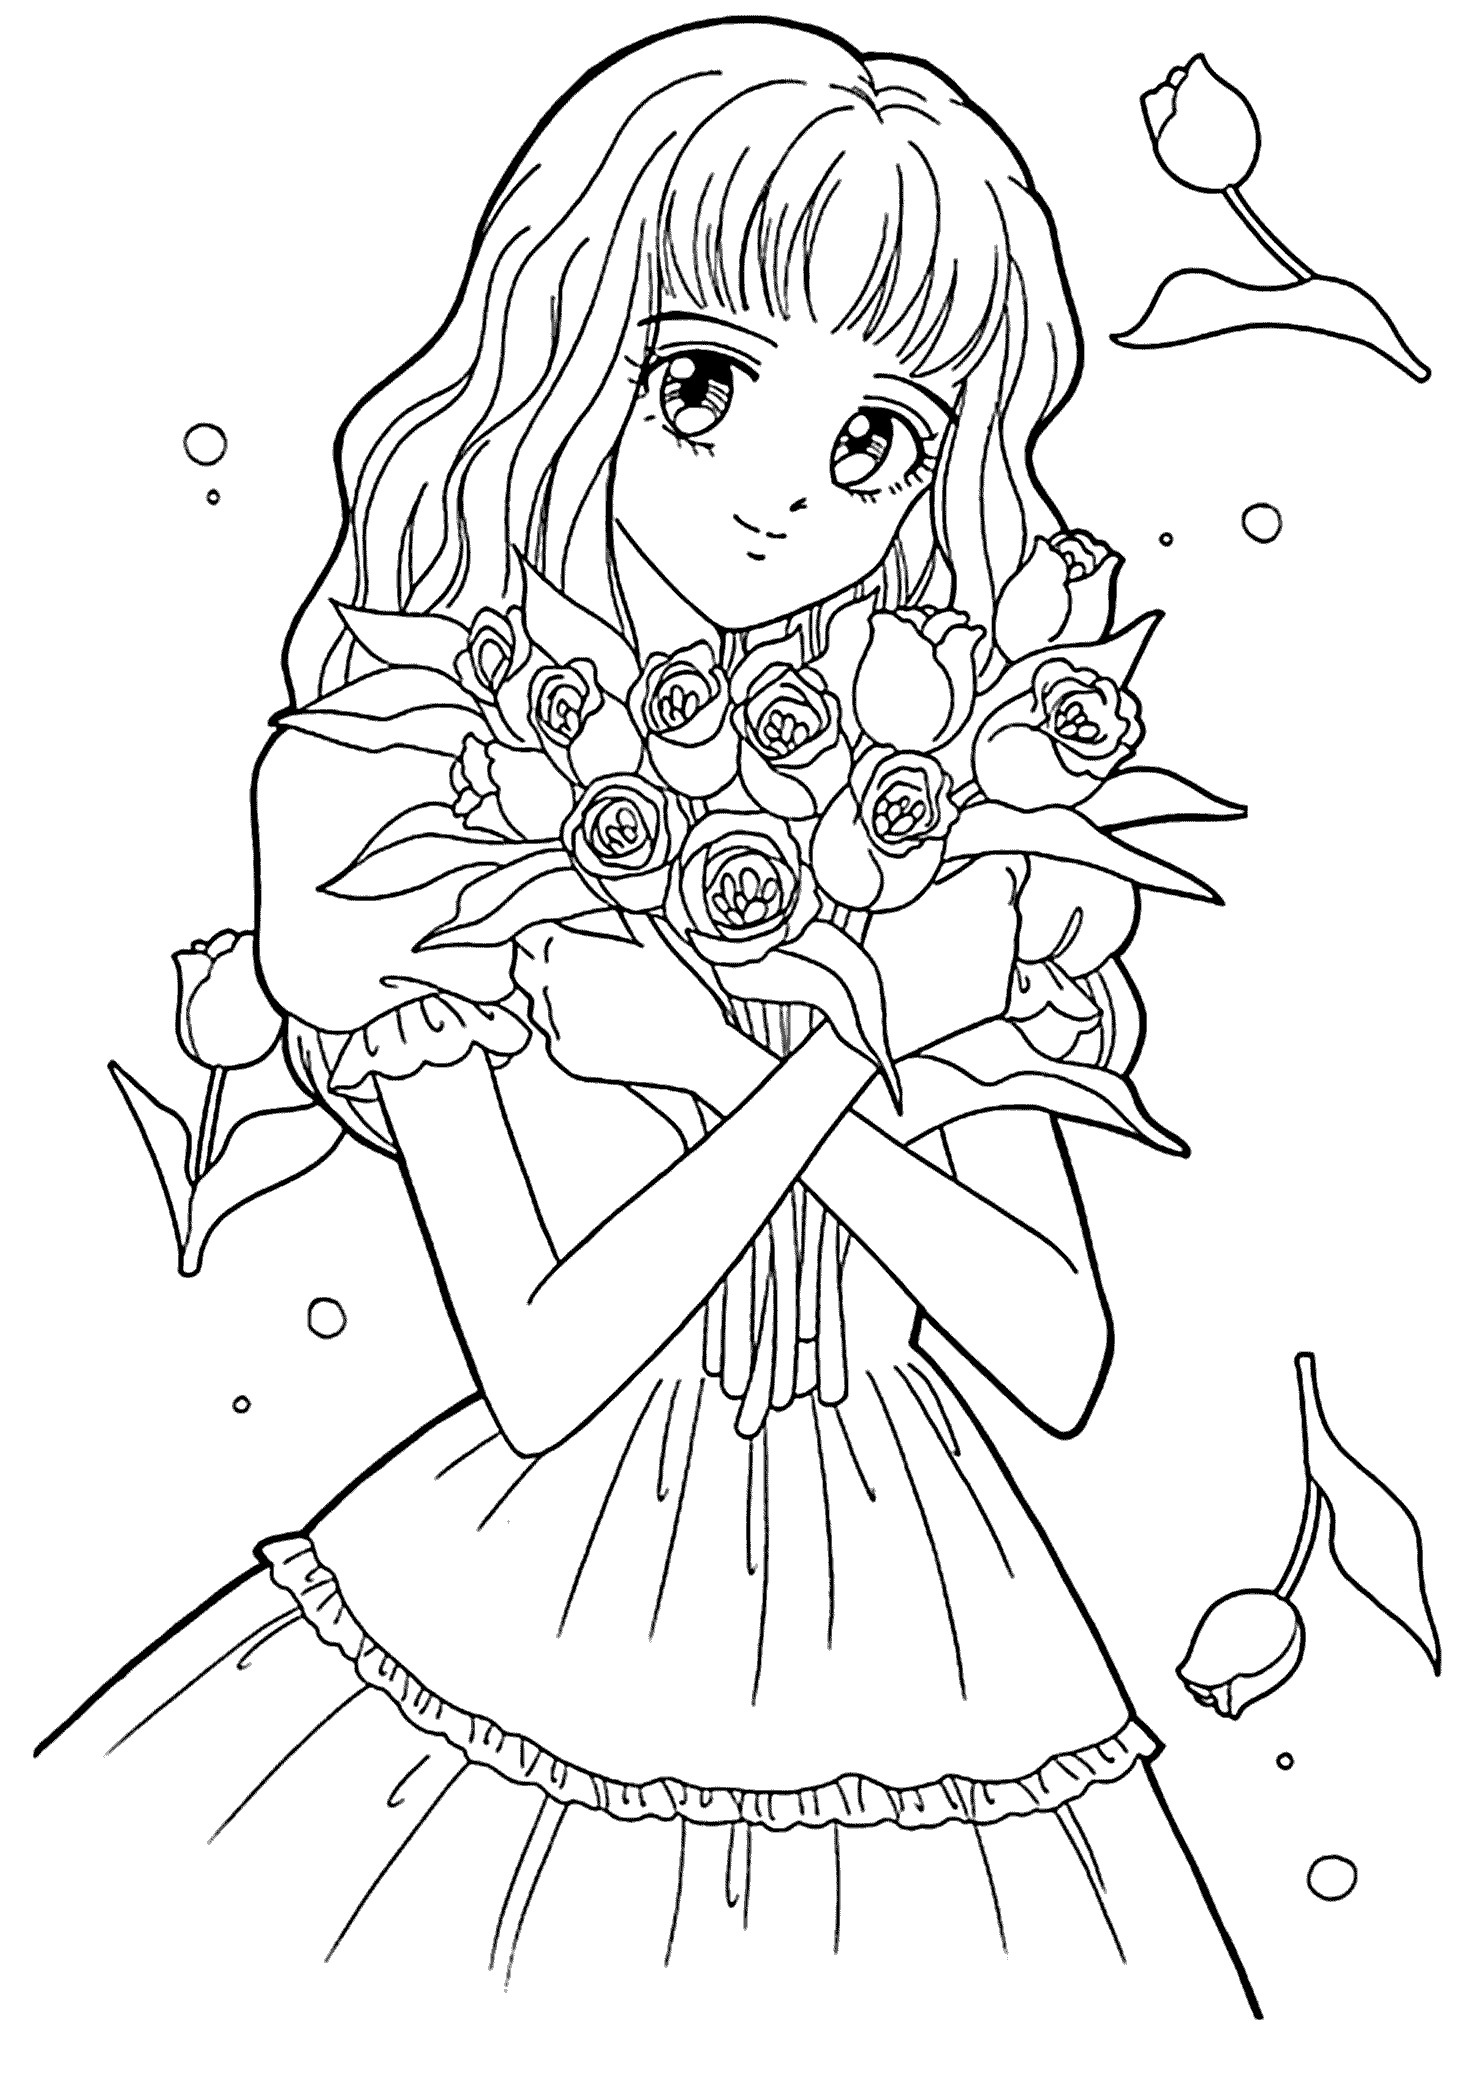 Free Coloring Pages Girls Printable
 Best Free Printable Coloring Pages for Kids and Teens